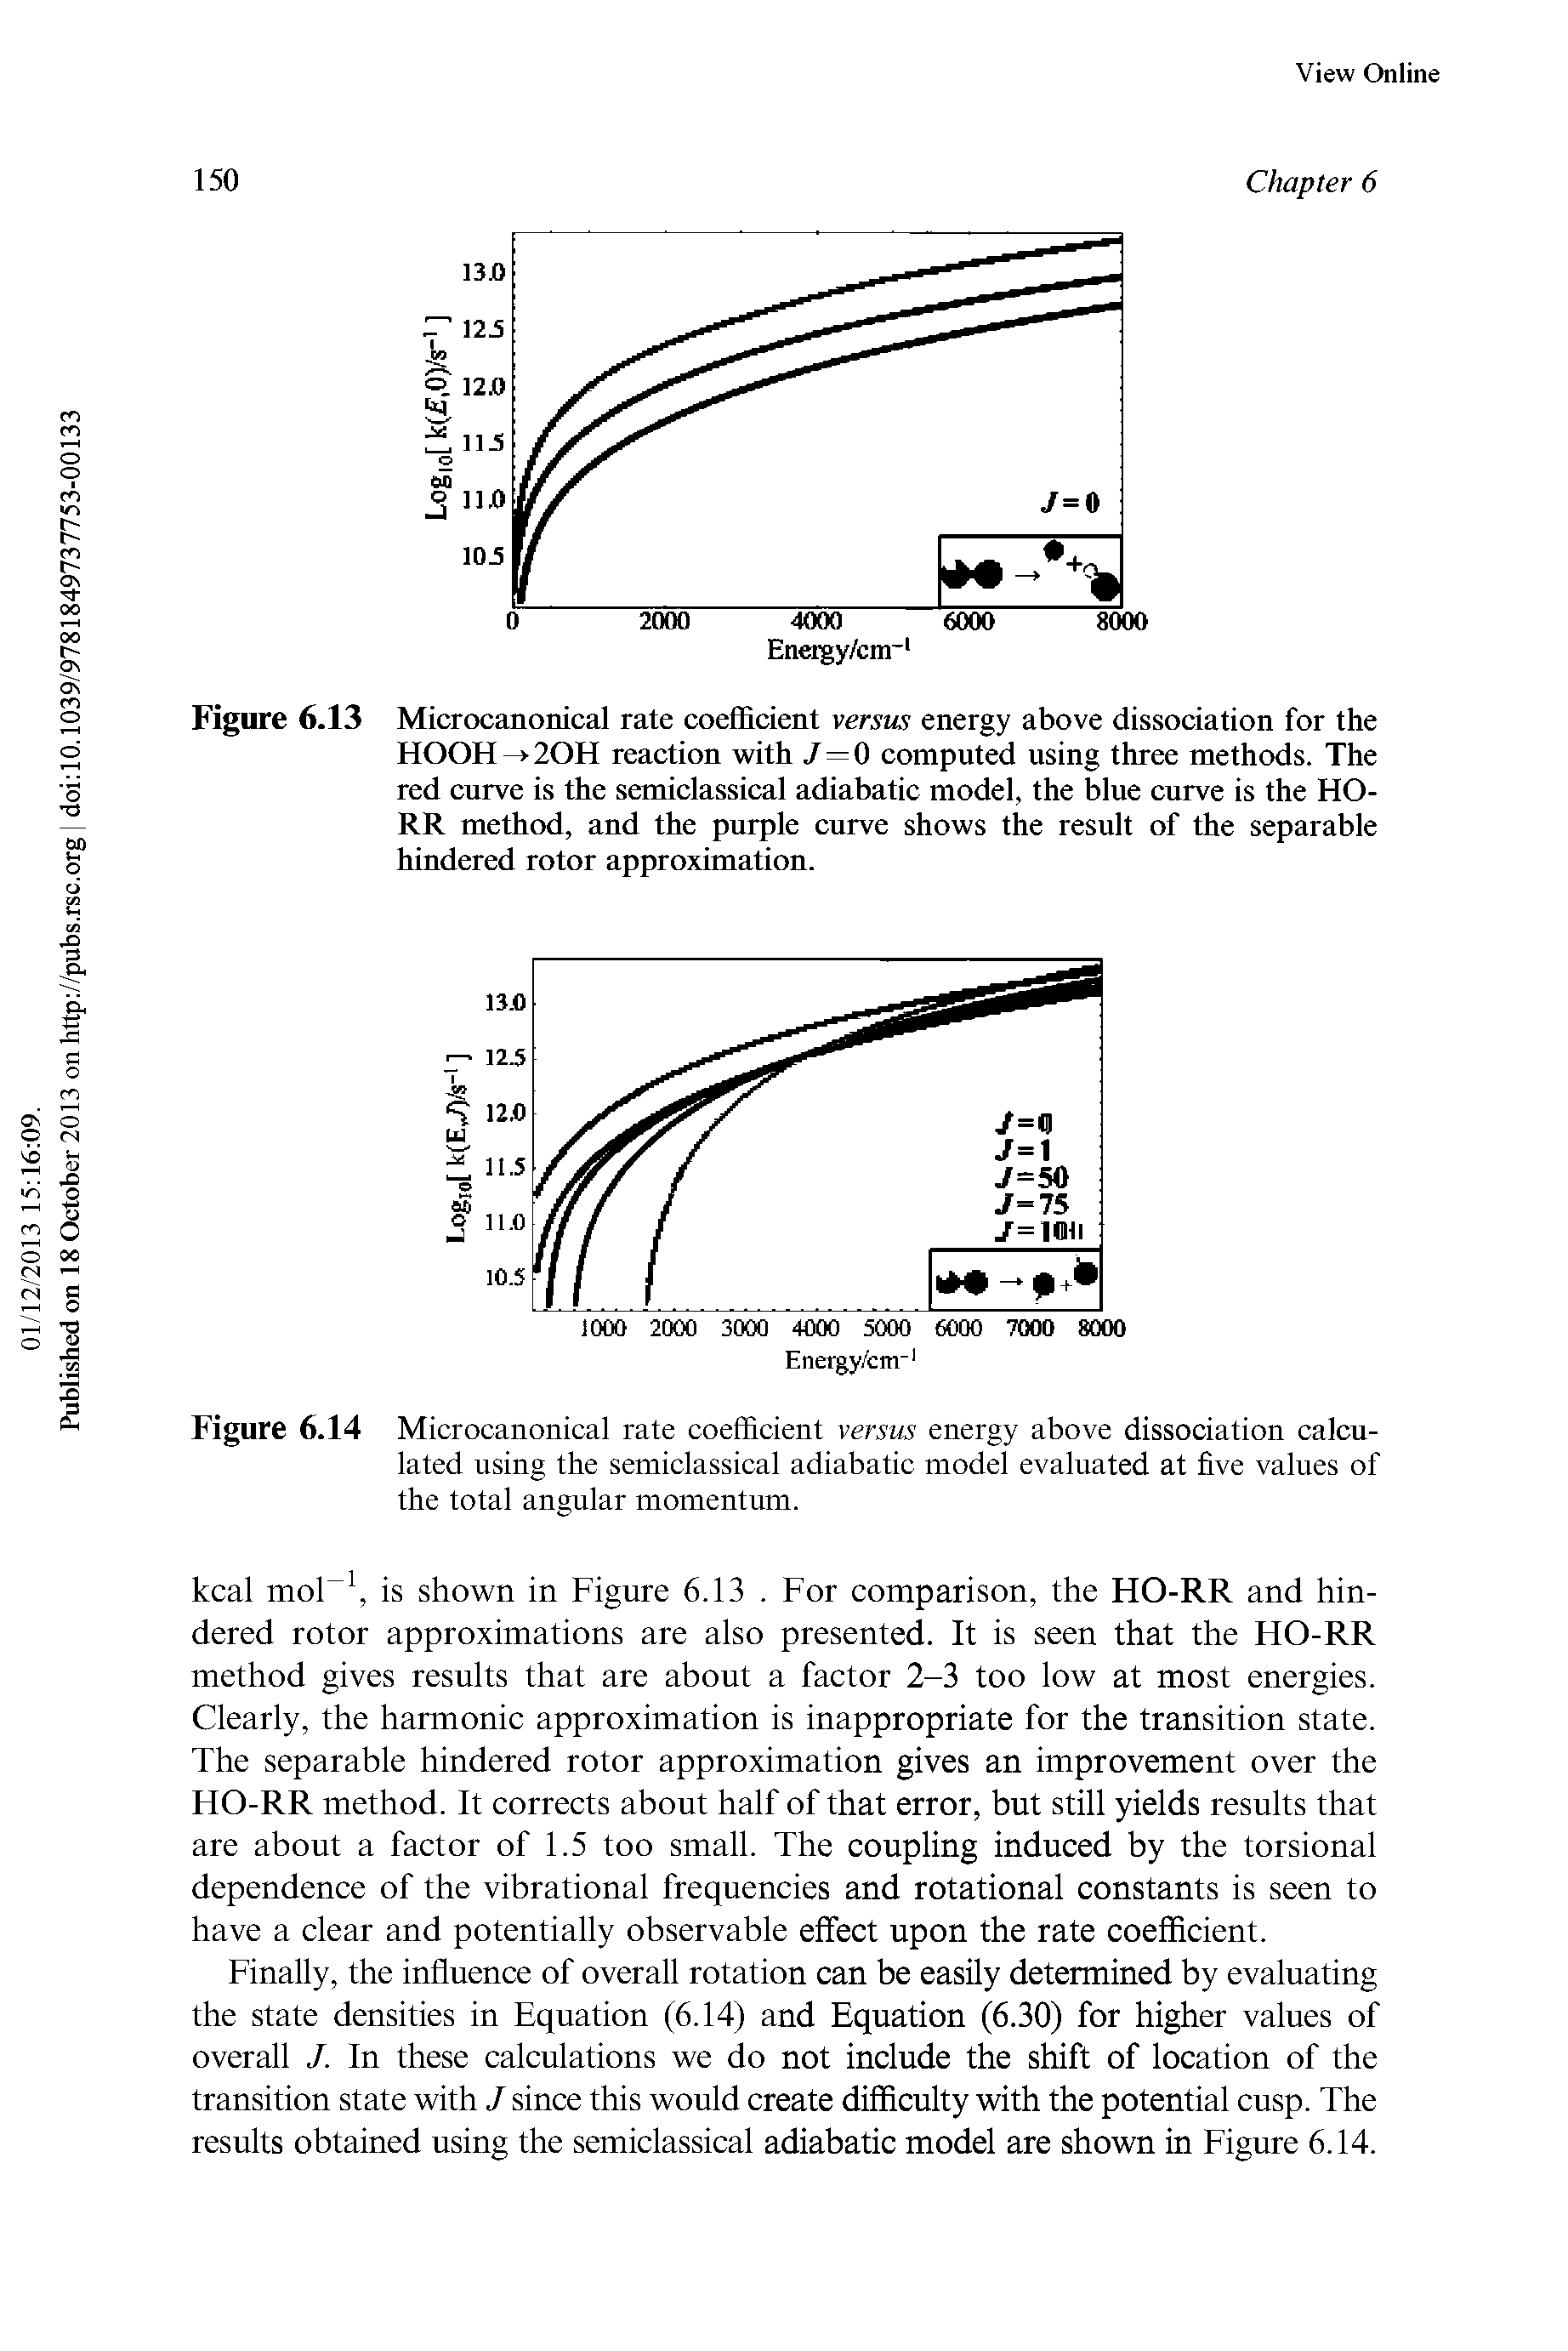 Figure 6.14 Microcanonical rate coefficient versus energy above dissociation calculated using the semiclassical adiabatic model evaluated at five values of the total angular momentum.